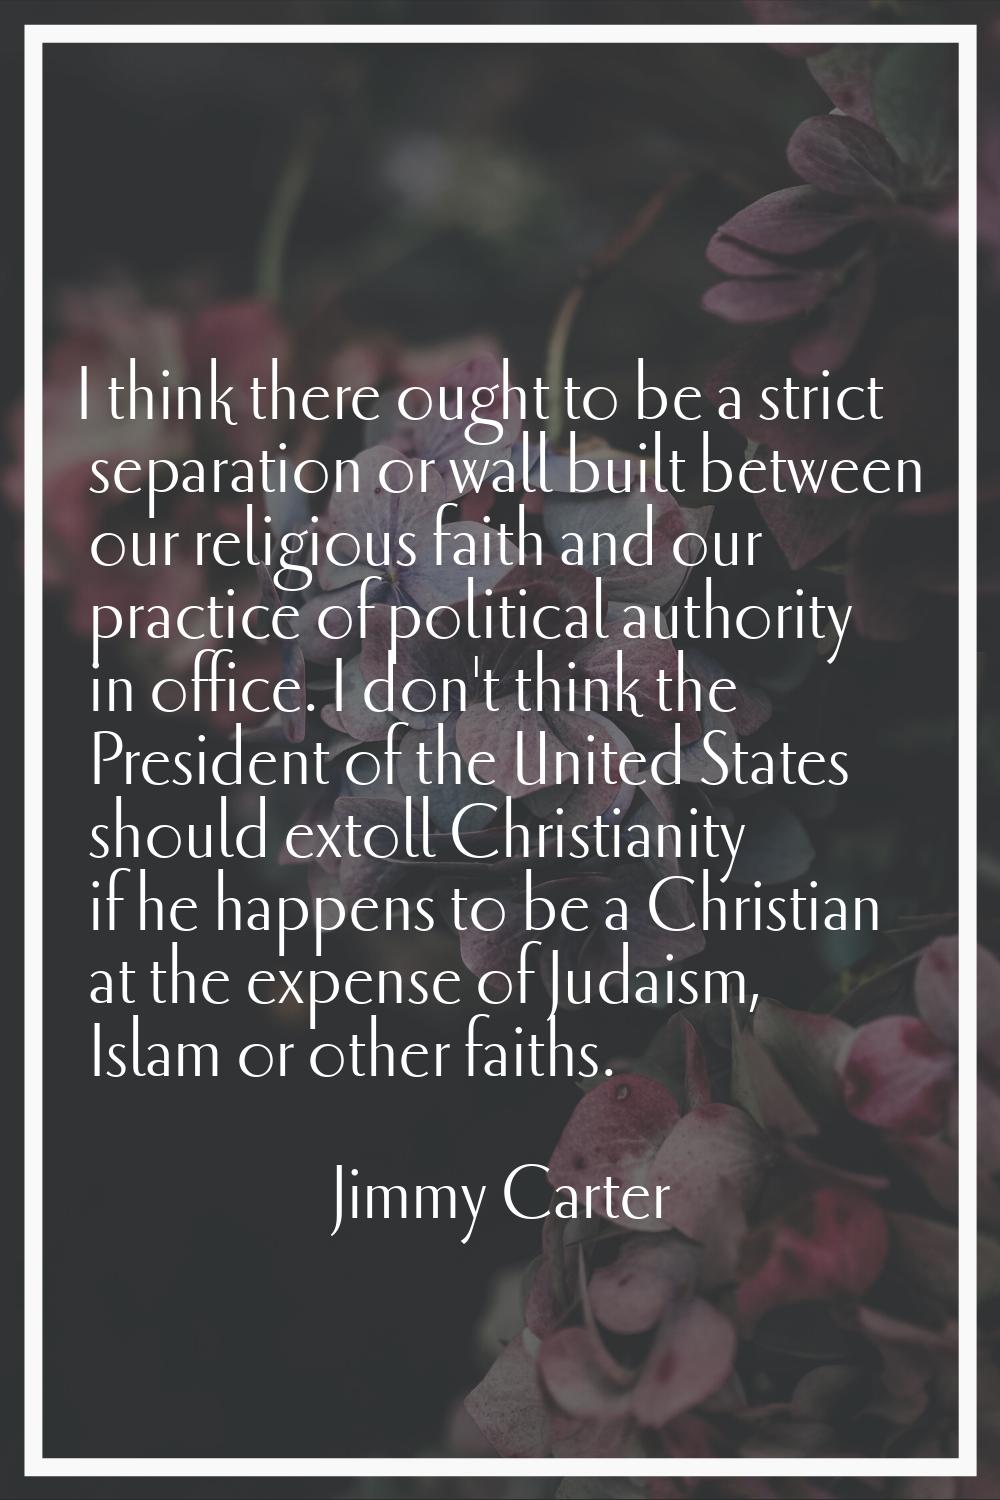 I think there ought to be a strict separation or wall built between our religious faith and our pra